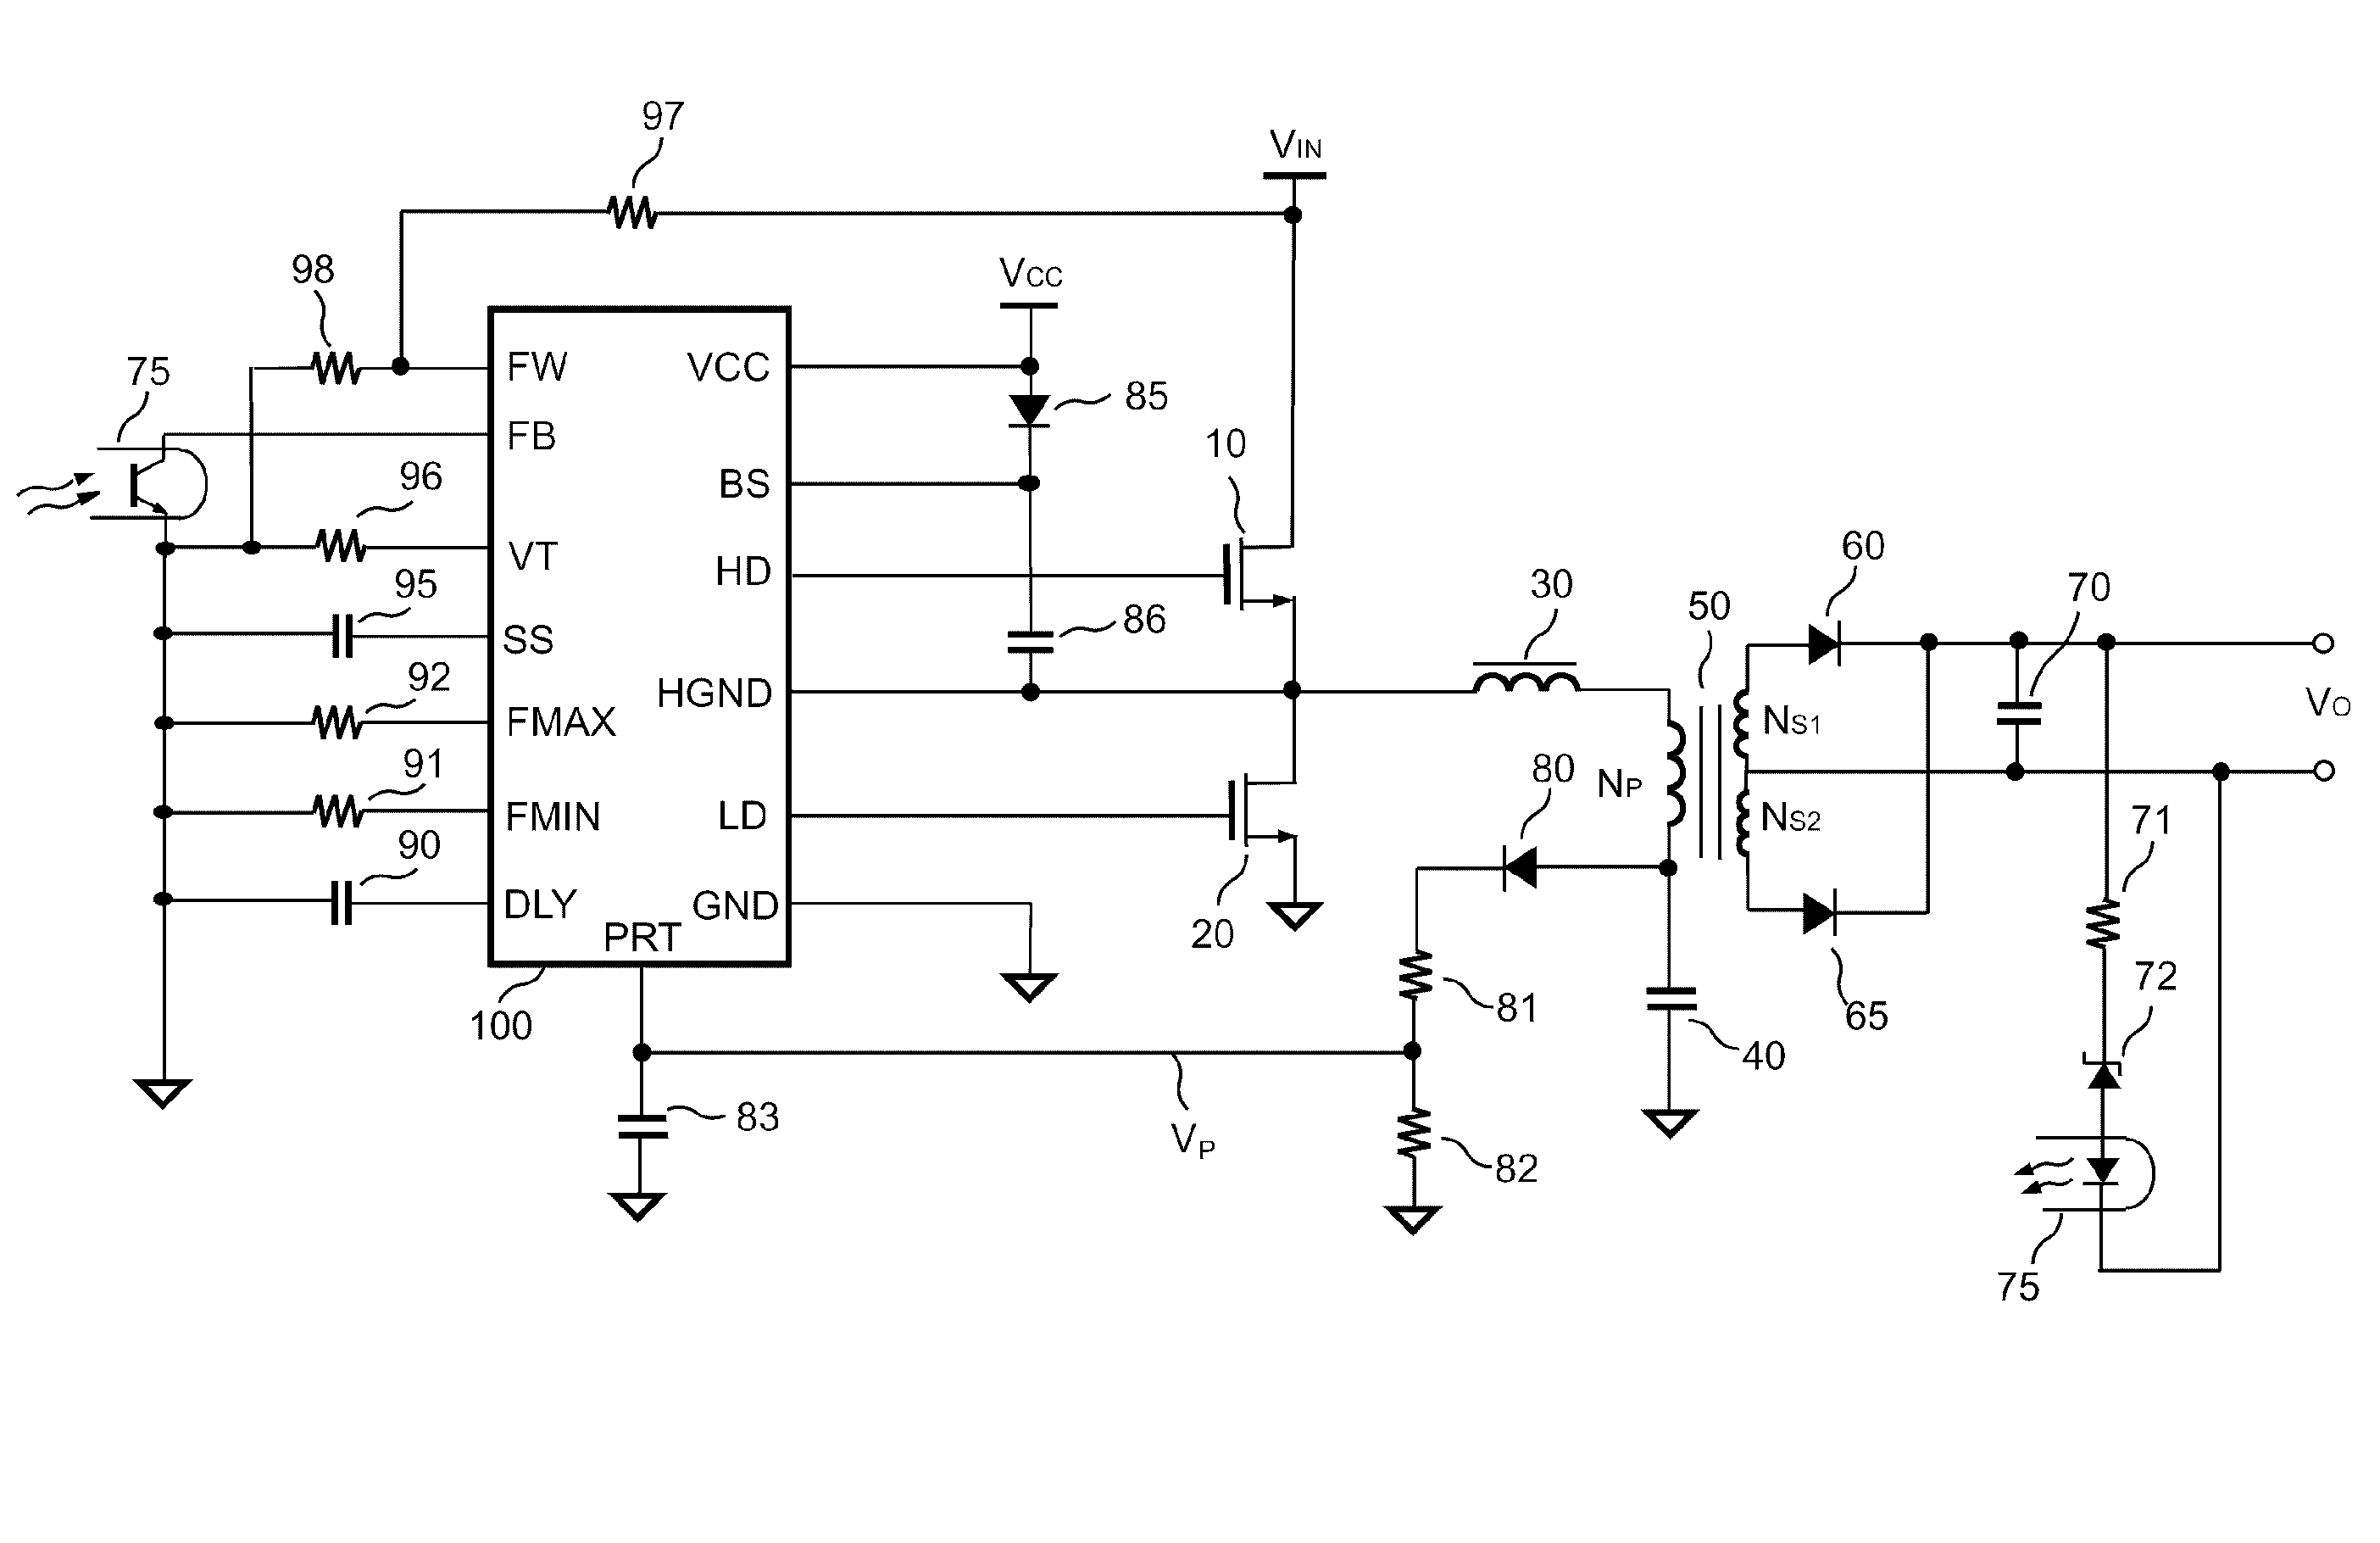 Switching controller for resonant power converter